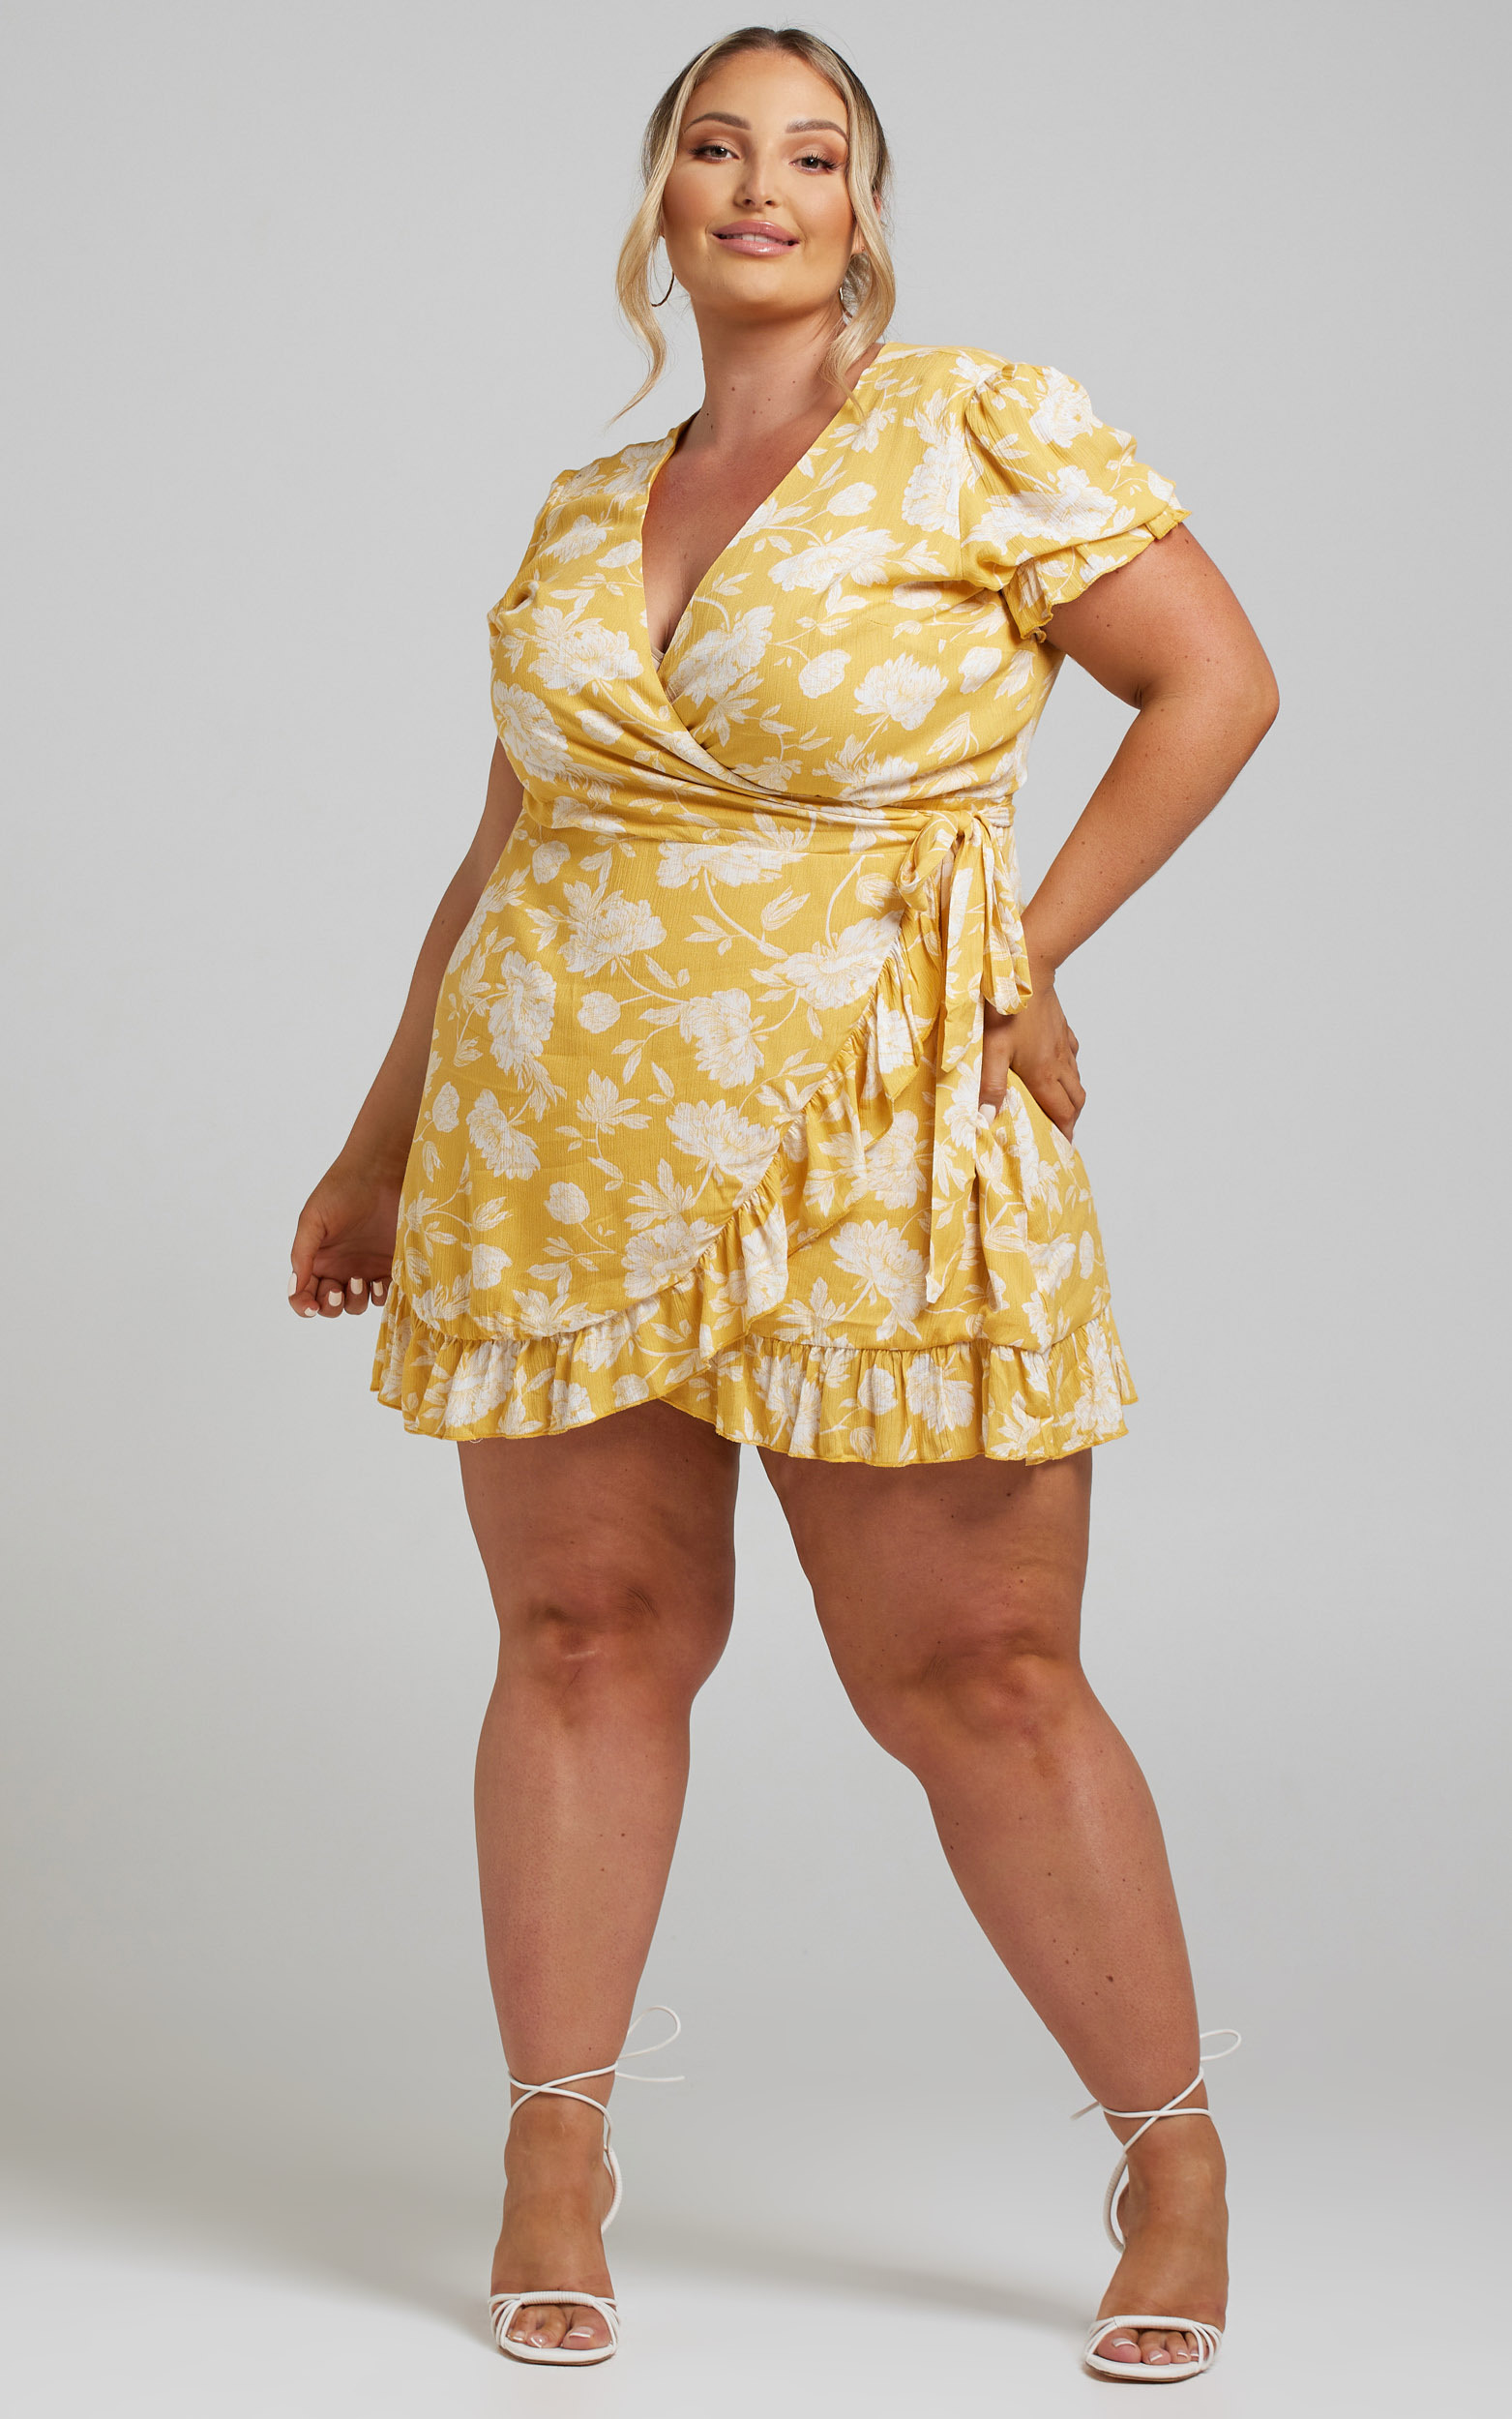 Seaside Views Dress in Yellow Floral - 18, YEL1, hi-res image number null